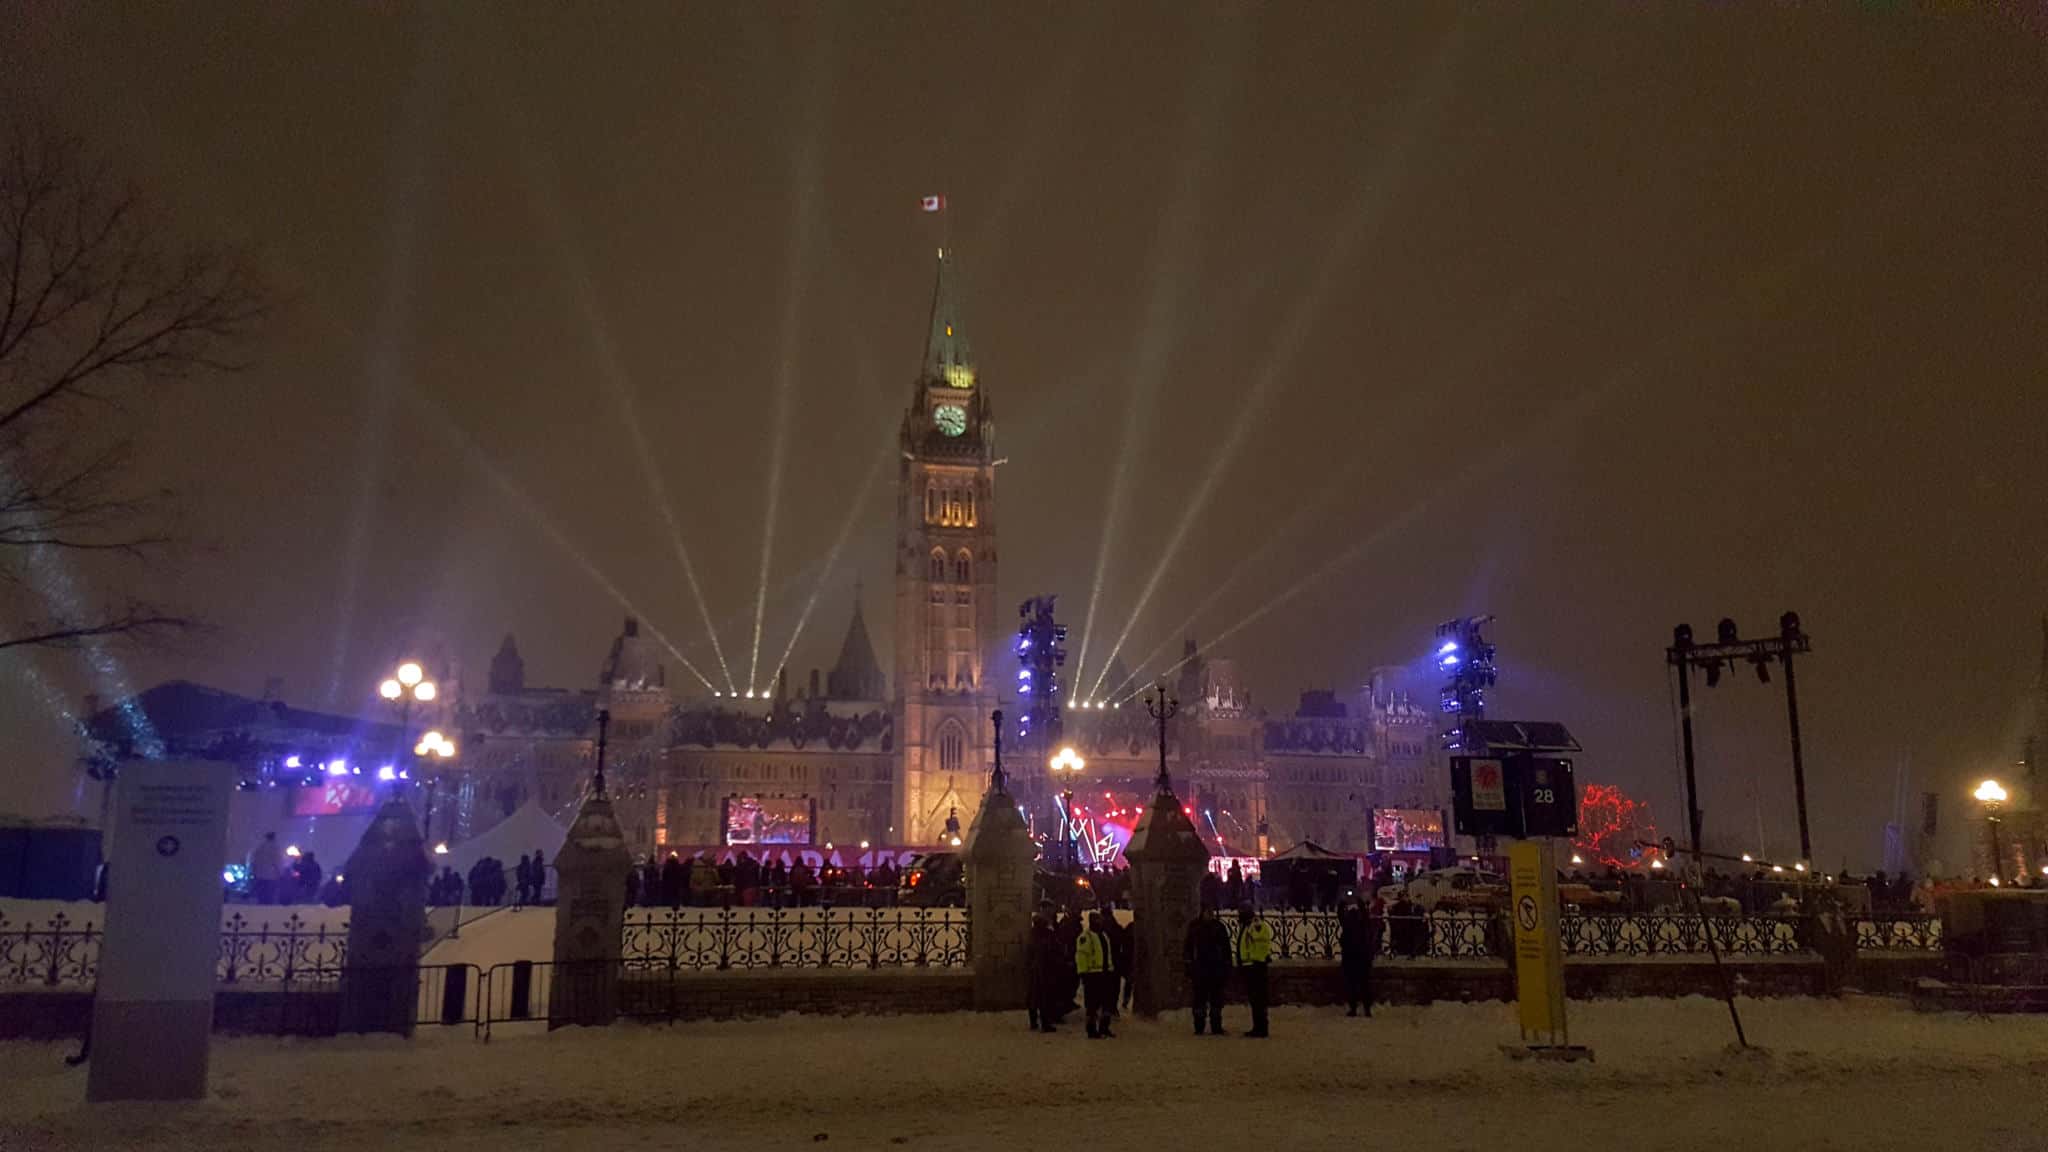 Experiencing the Parliament Hill Light and Sound Show is one of the things to do in Ottawa